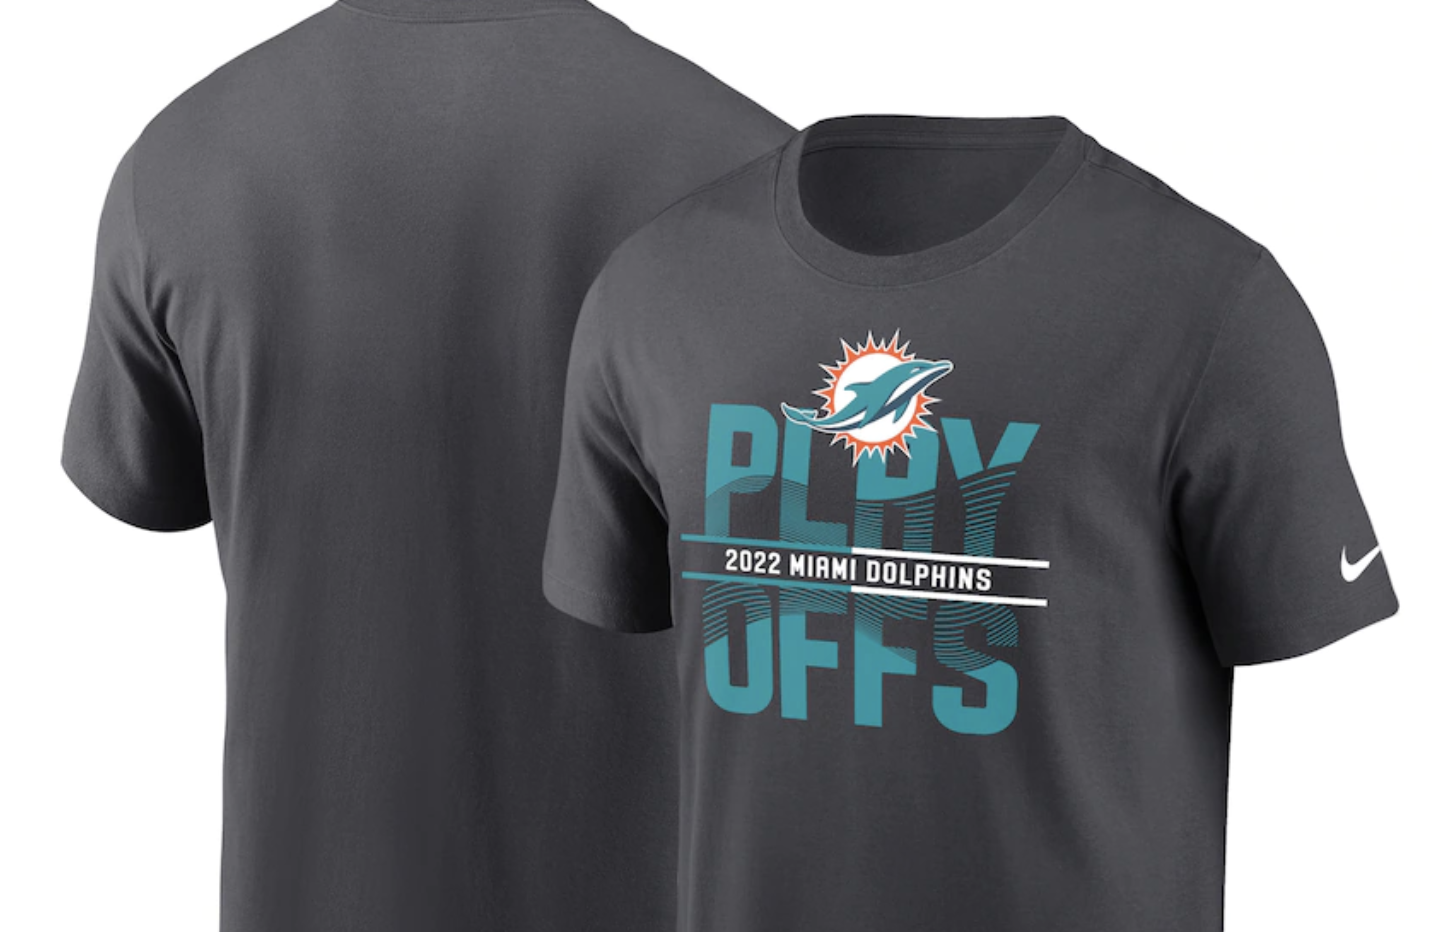 Dolphins playoff gear: How to get Dolphins NFL playoffs 2022-23